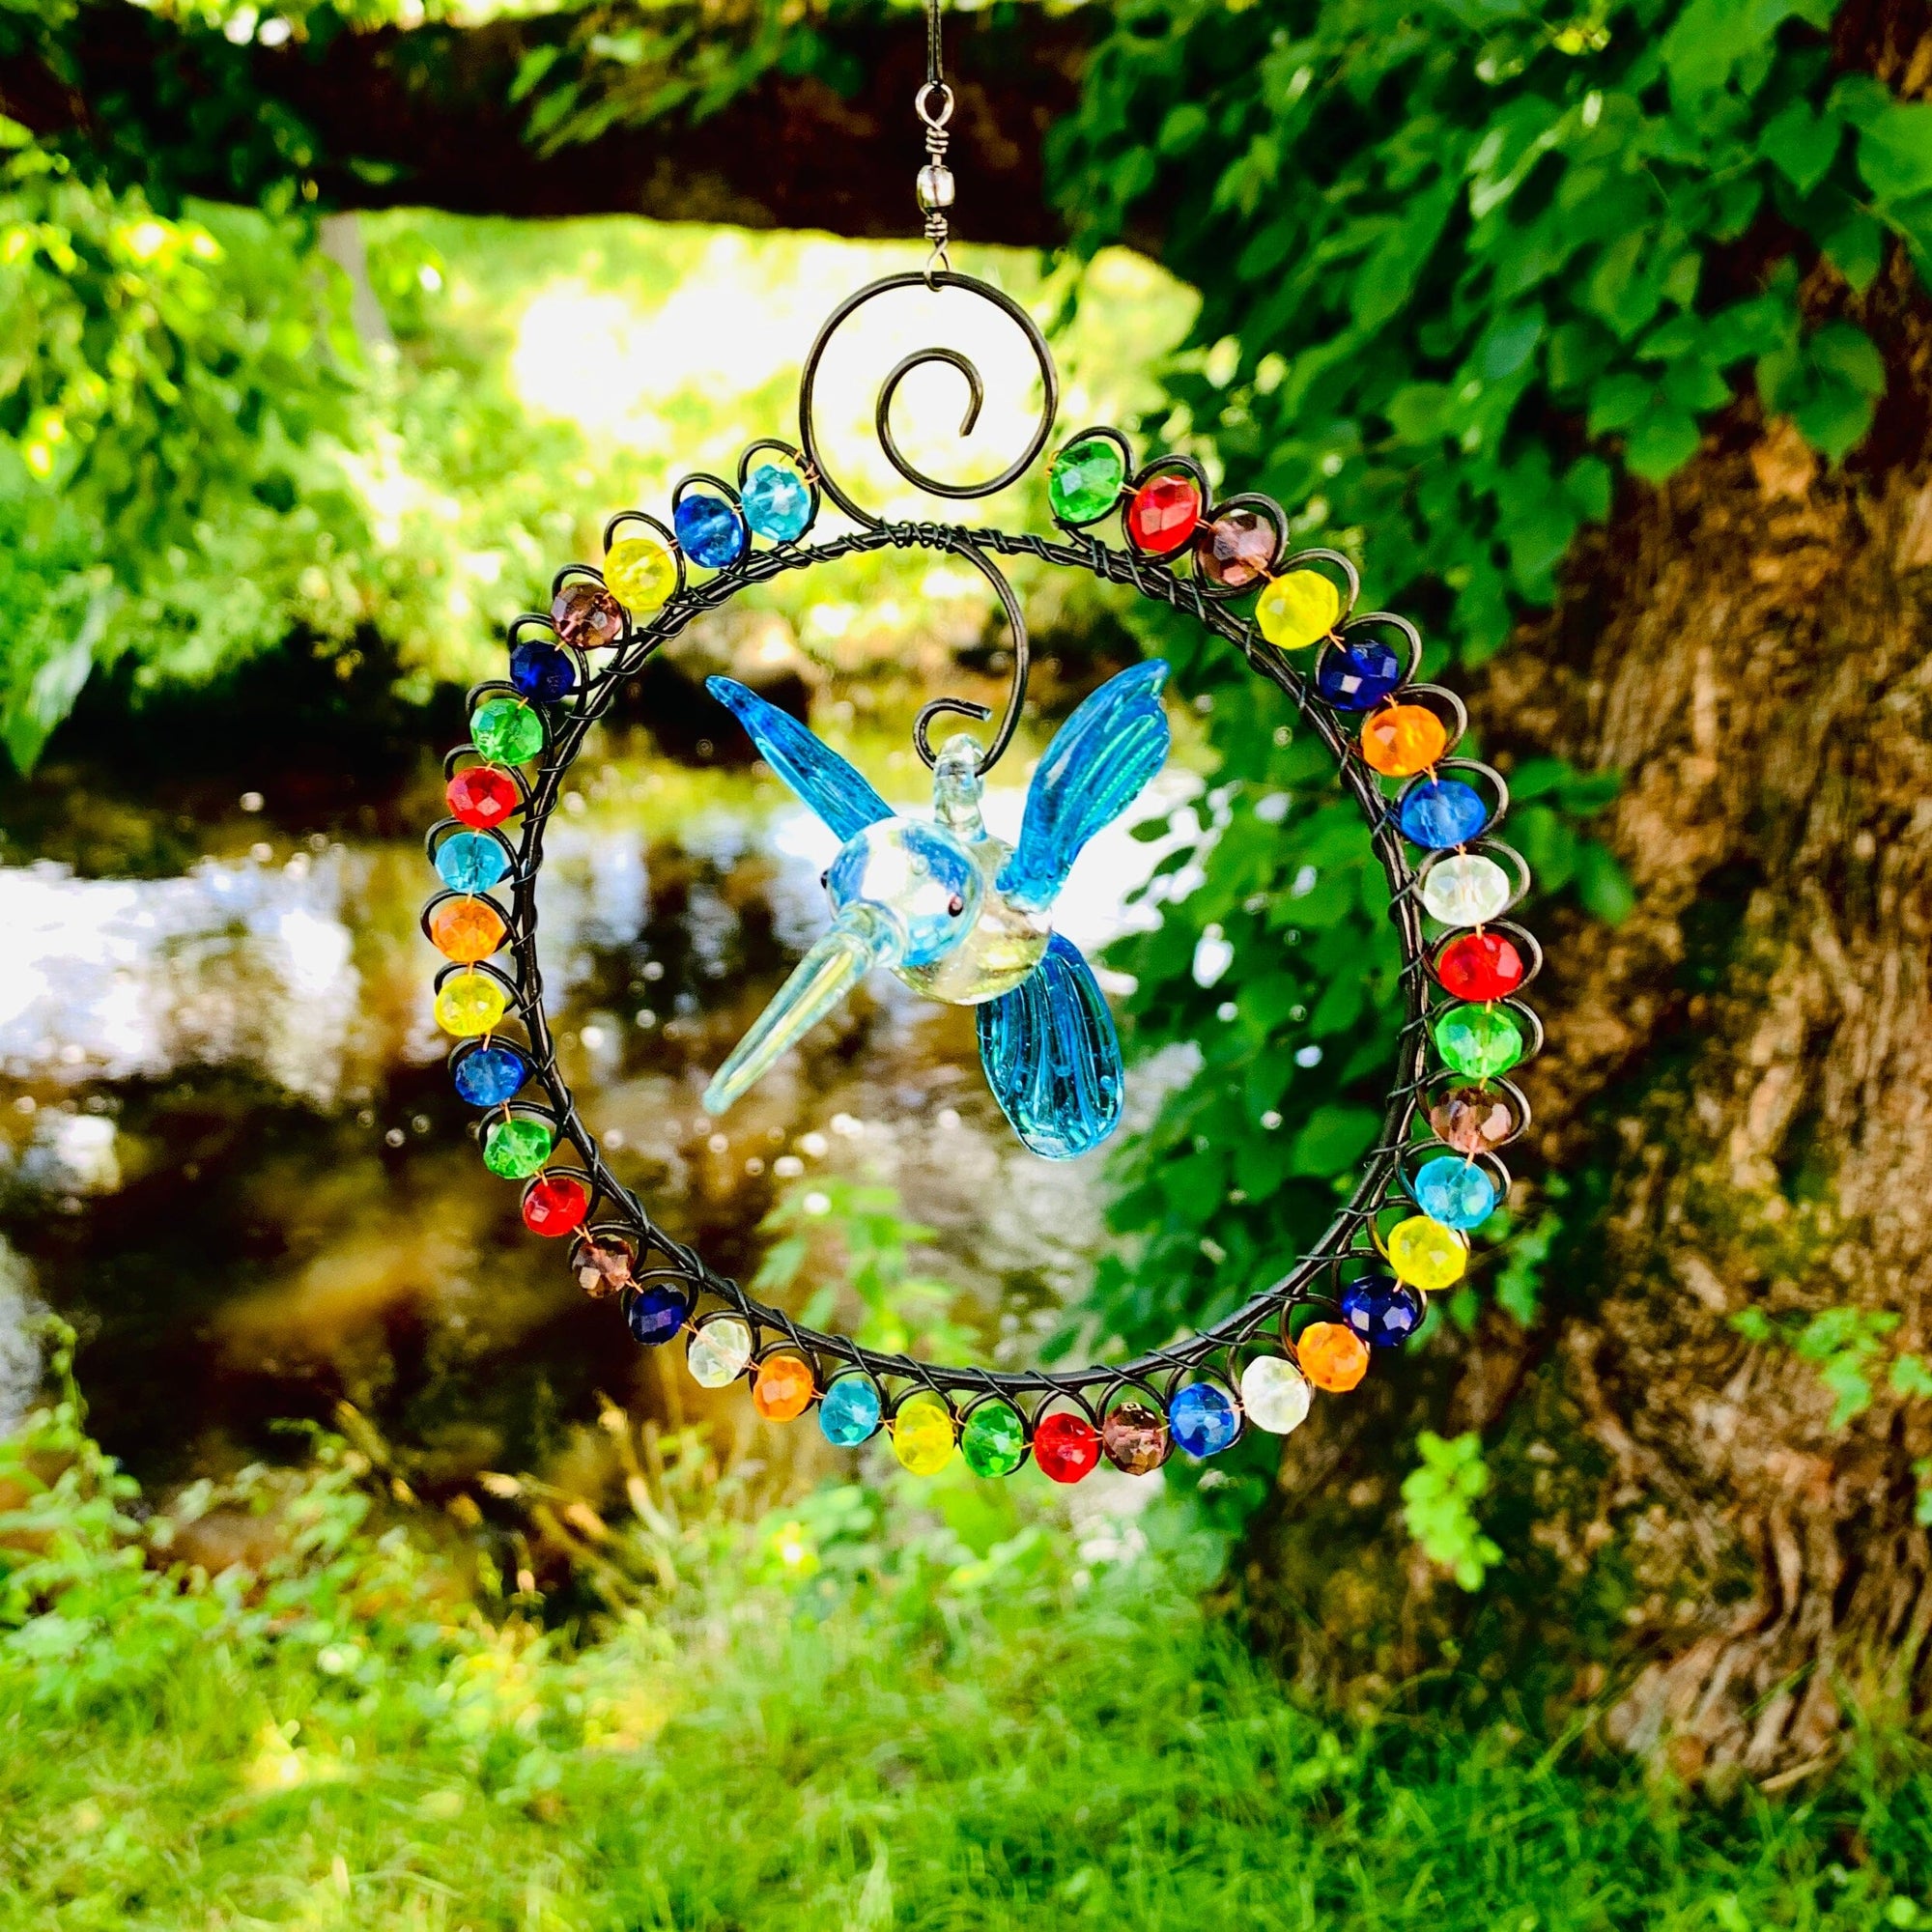 Glass Beaded Suncatcher with Hummingbird 8 , Blue Decor Whimsical Wire and Glass 